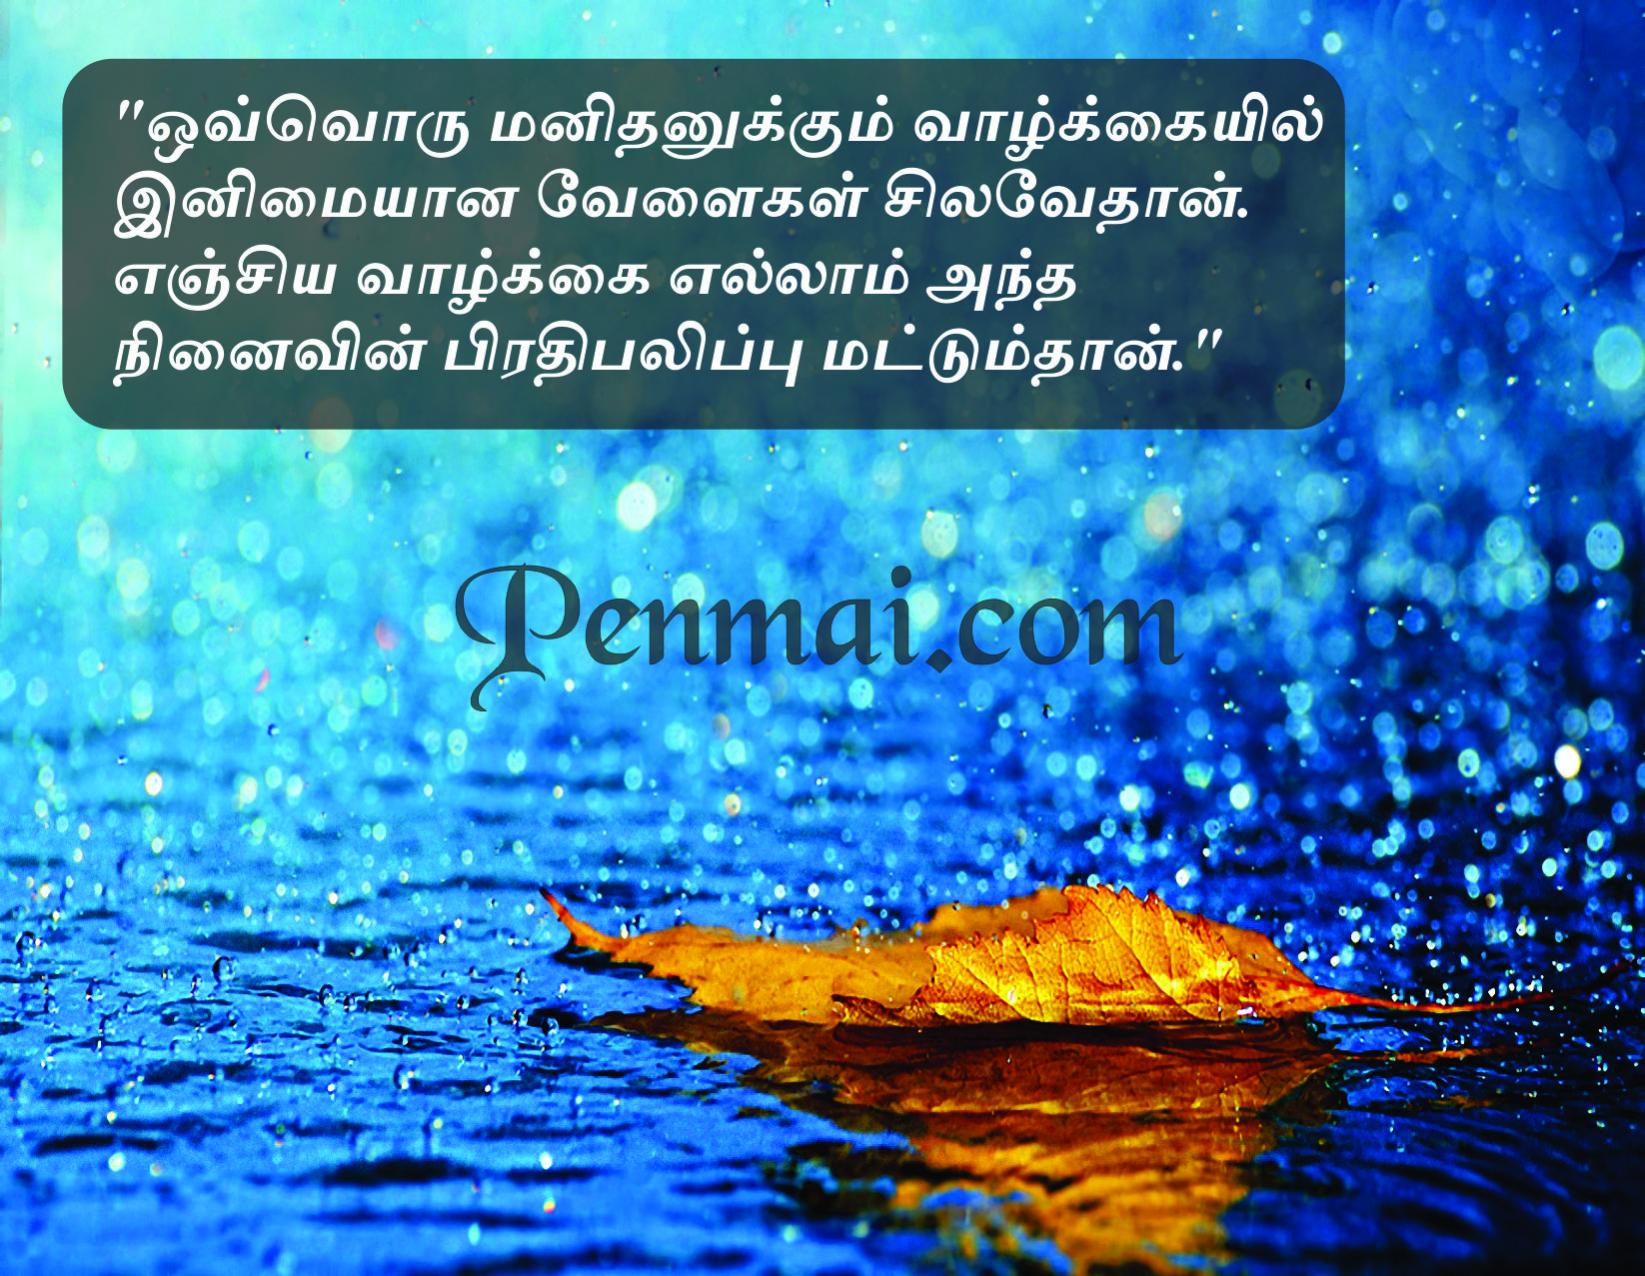 Tamil Inspirational Quotes - Islamic Motivational Quotes In Tamil - HD Wallpaper 